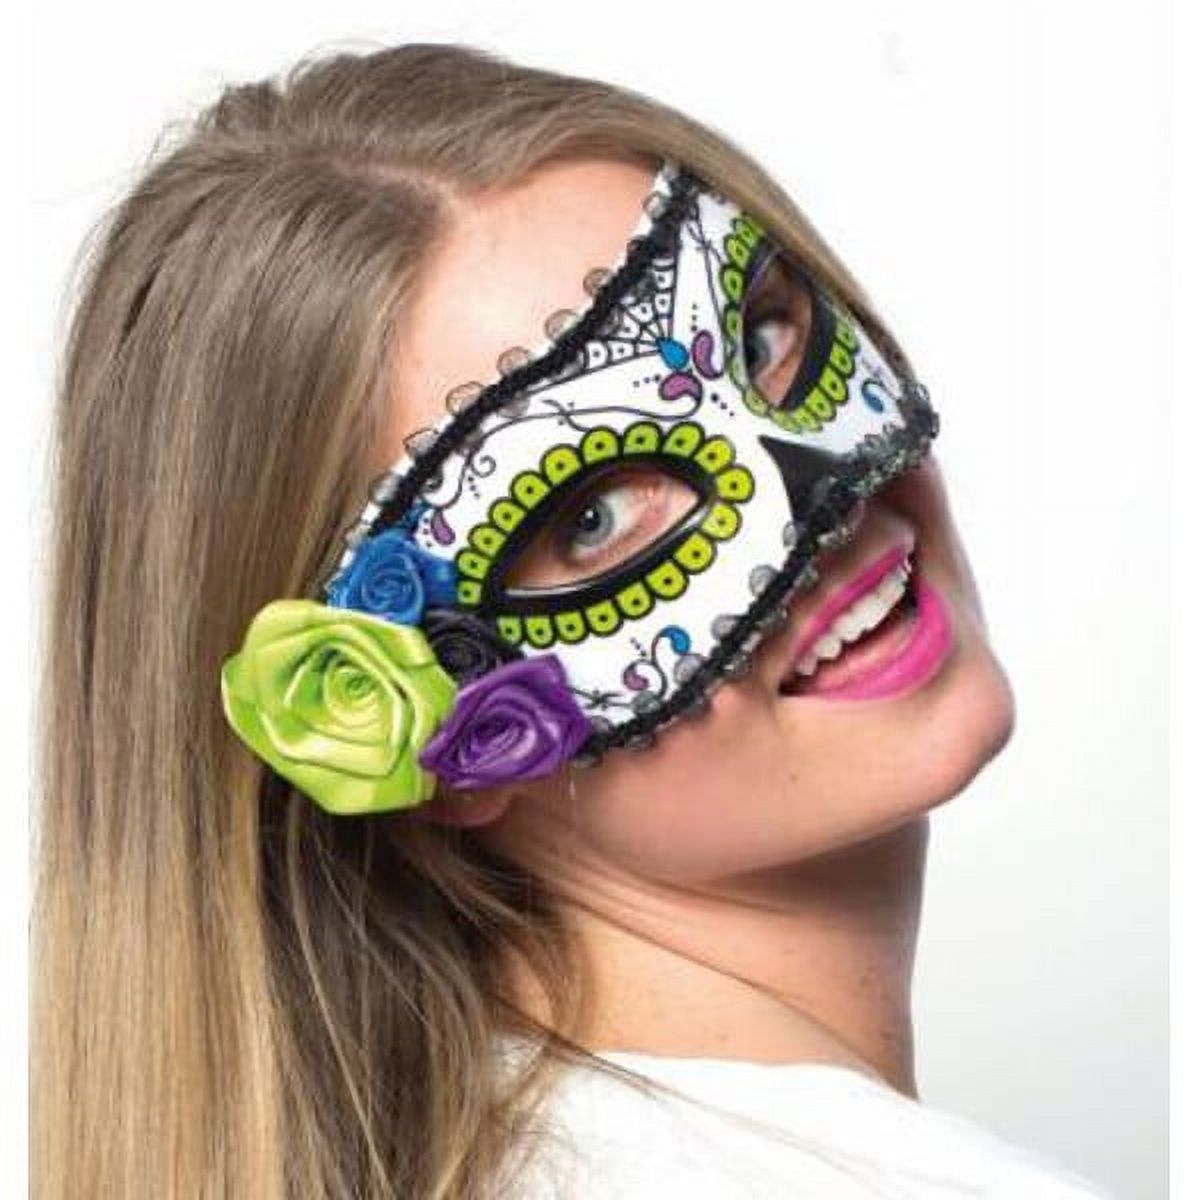 Day of Dead Mask with Flower Trim - image 1 of 1